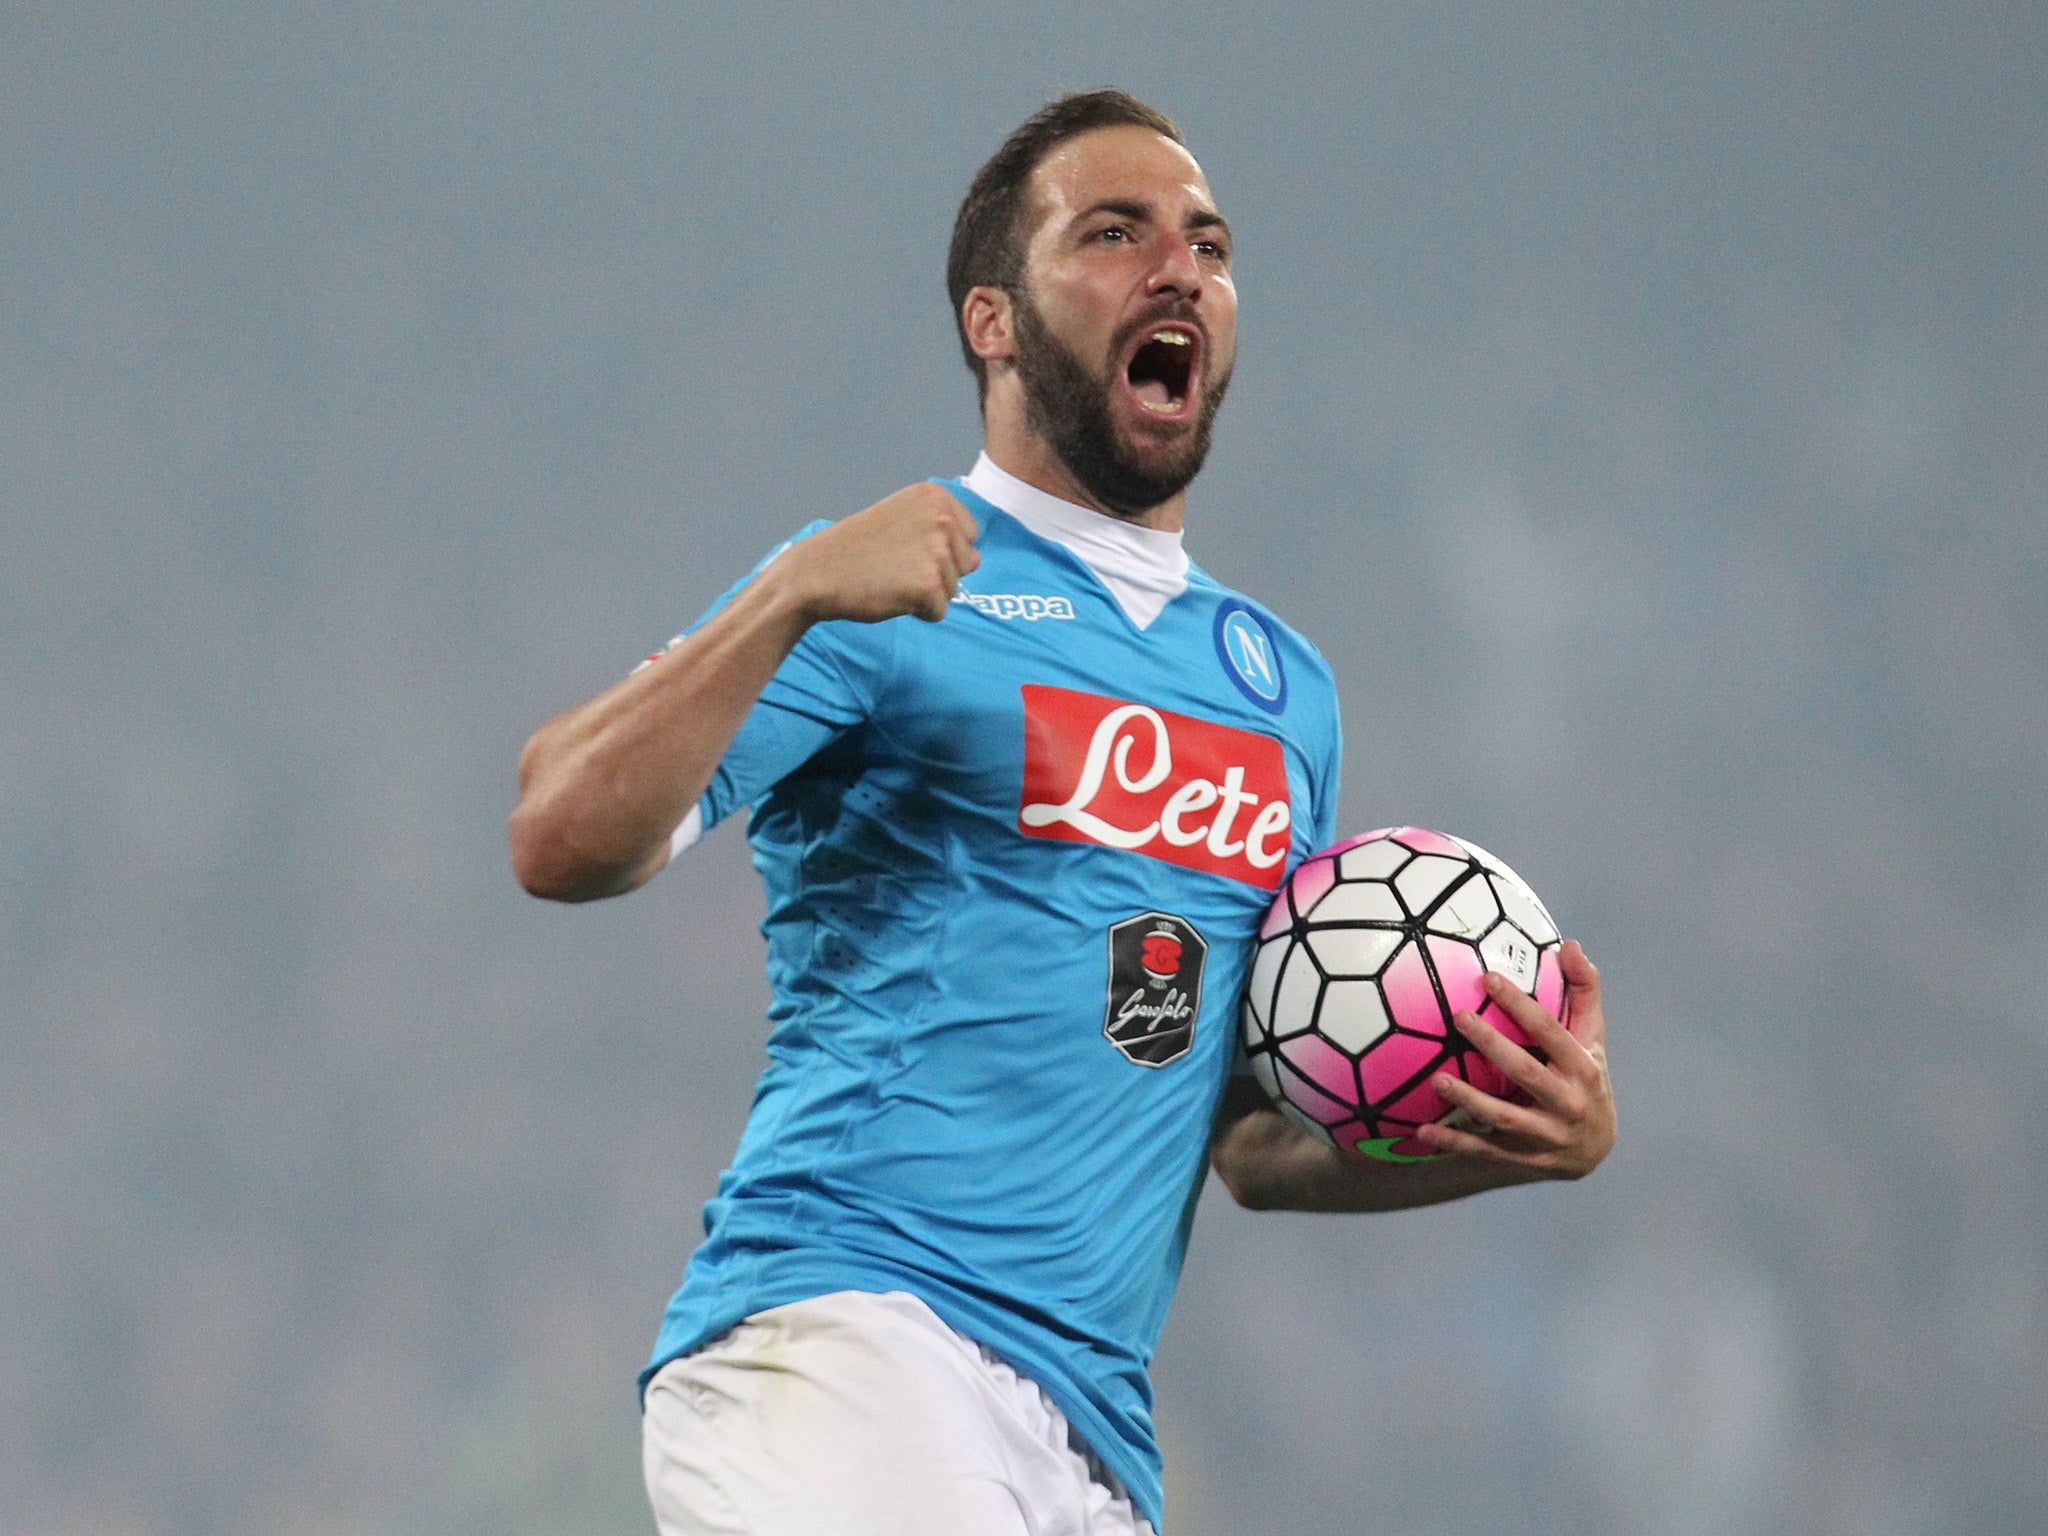 &#13;
Gonzalo Higuain will not leave Napoli for anything less than £78.5m &#13;